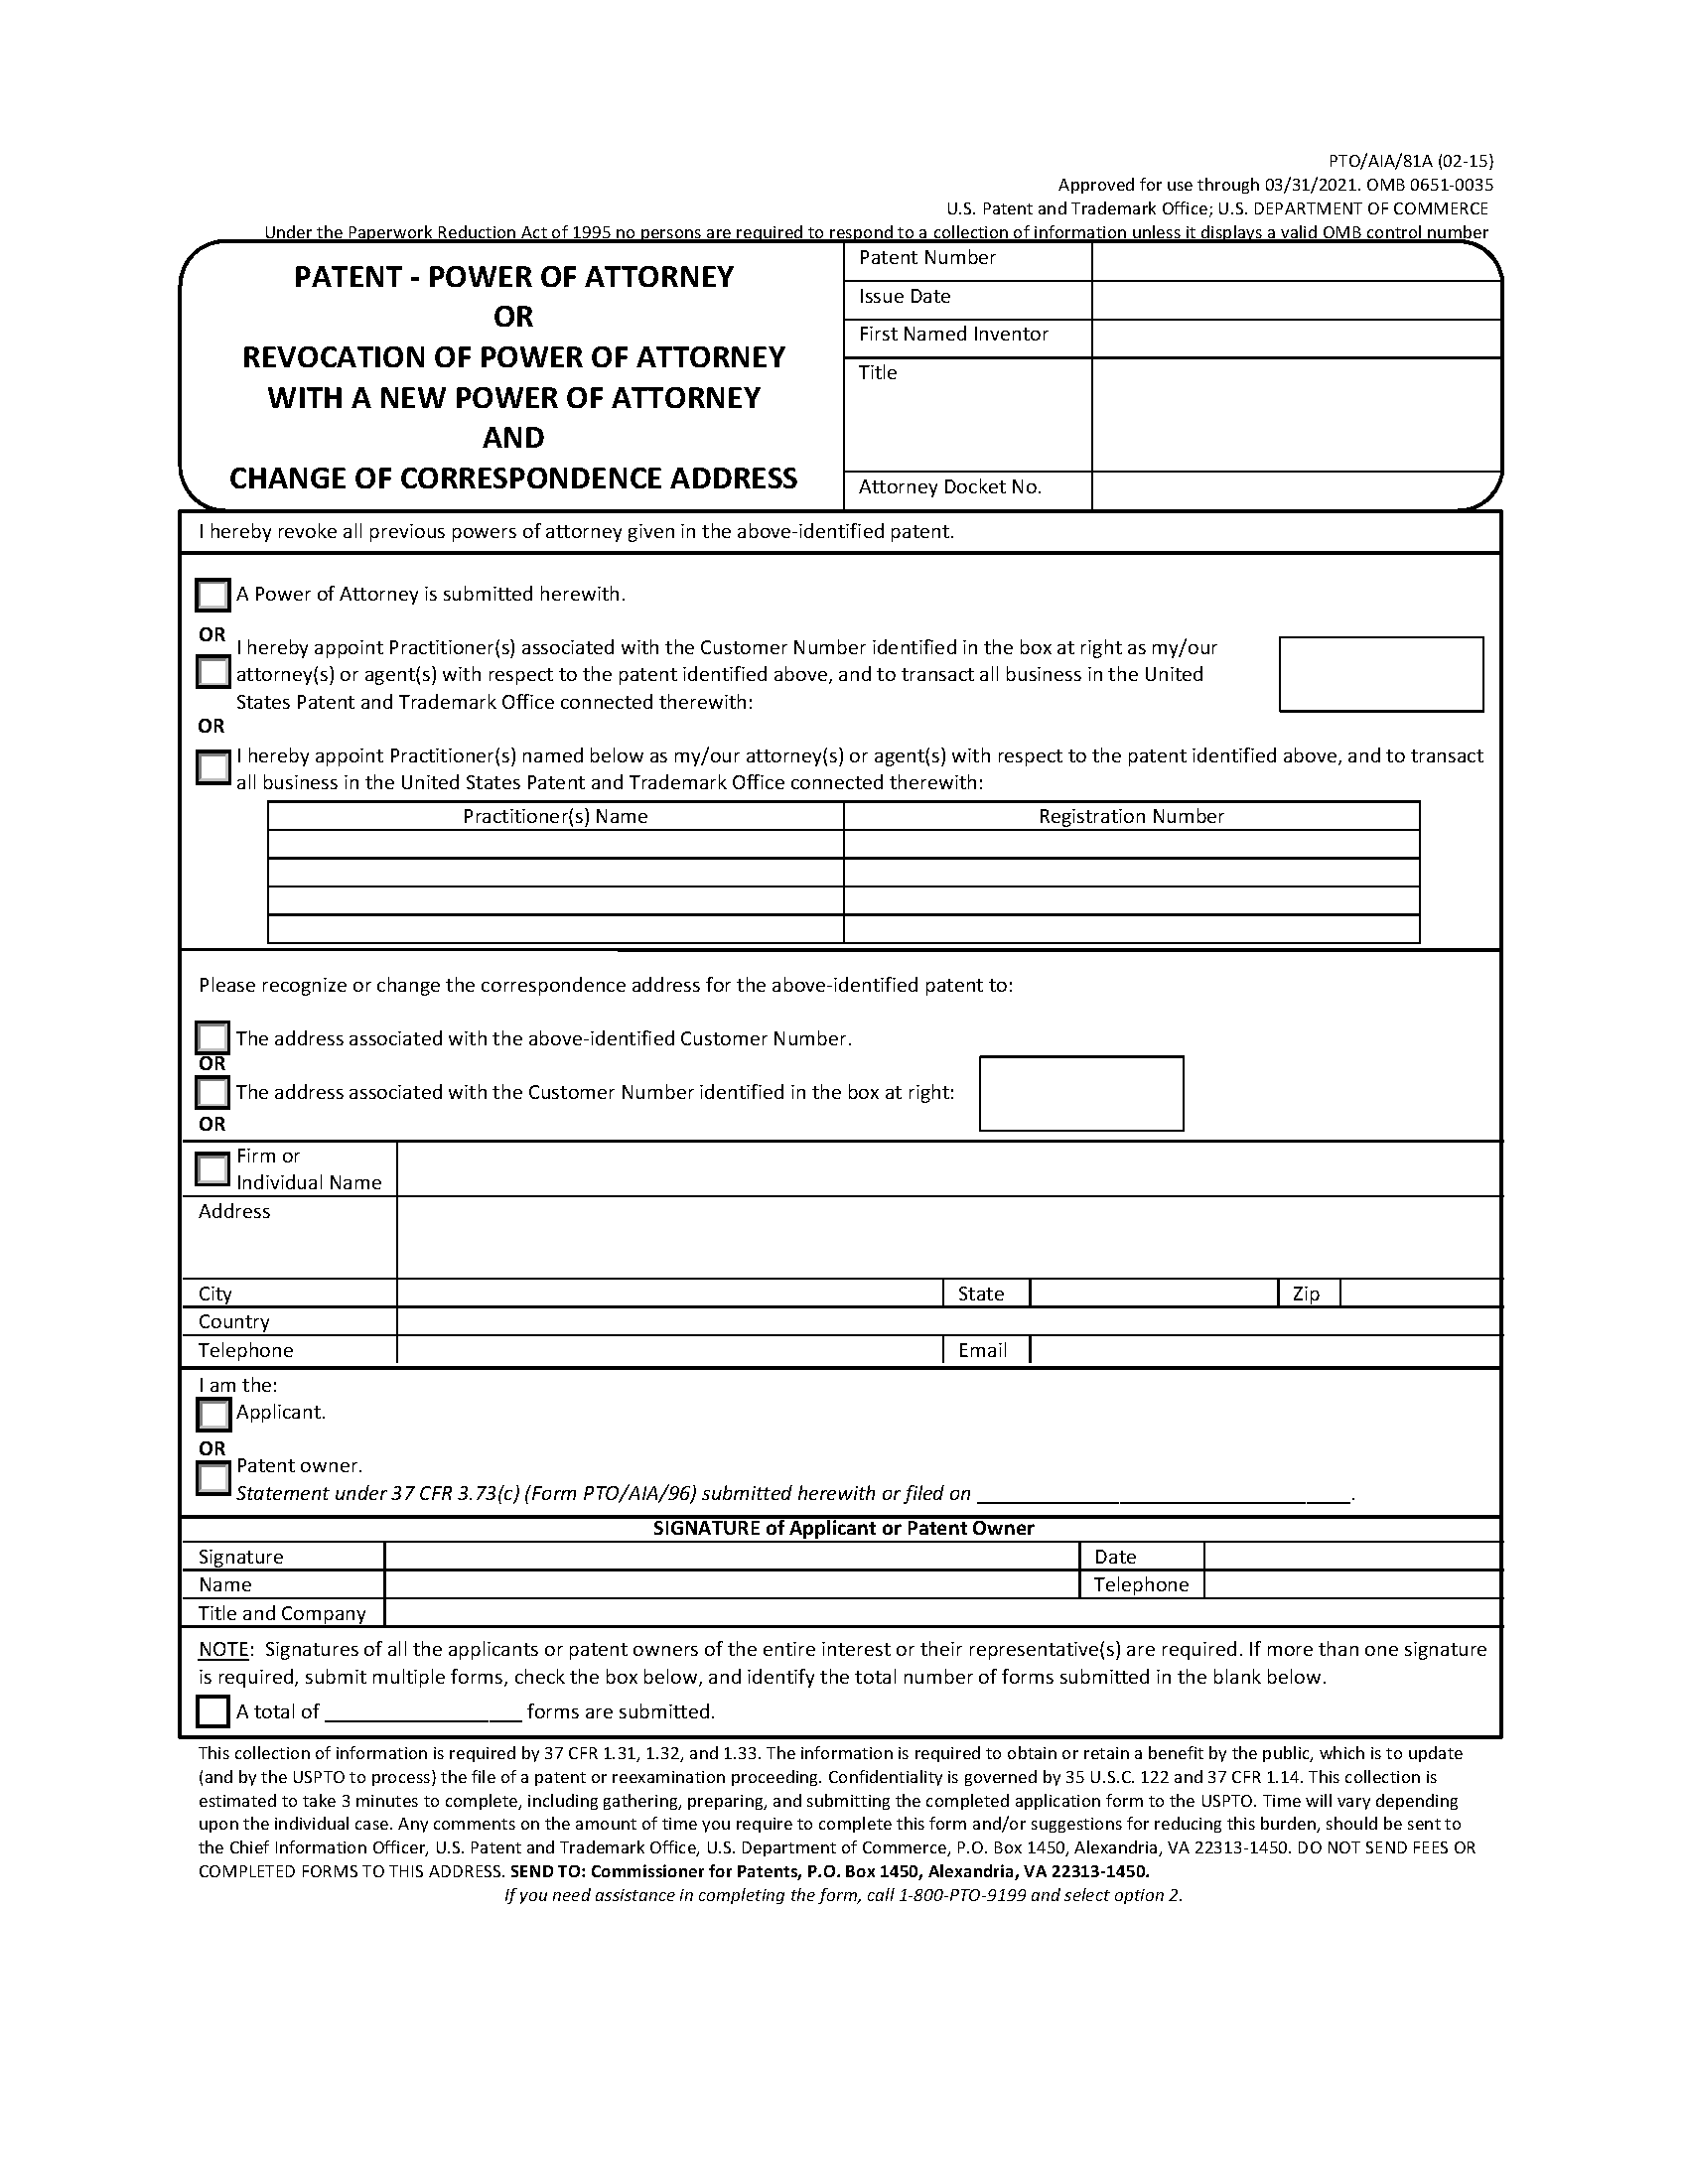 Power of Attorney form PTO/AIA/81A page 1